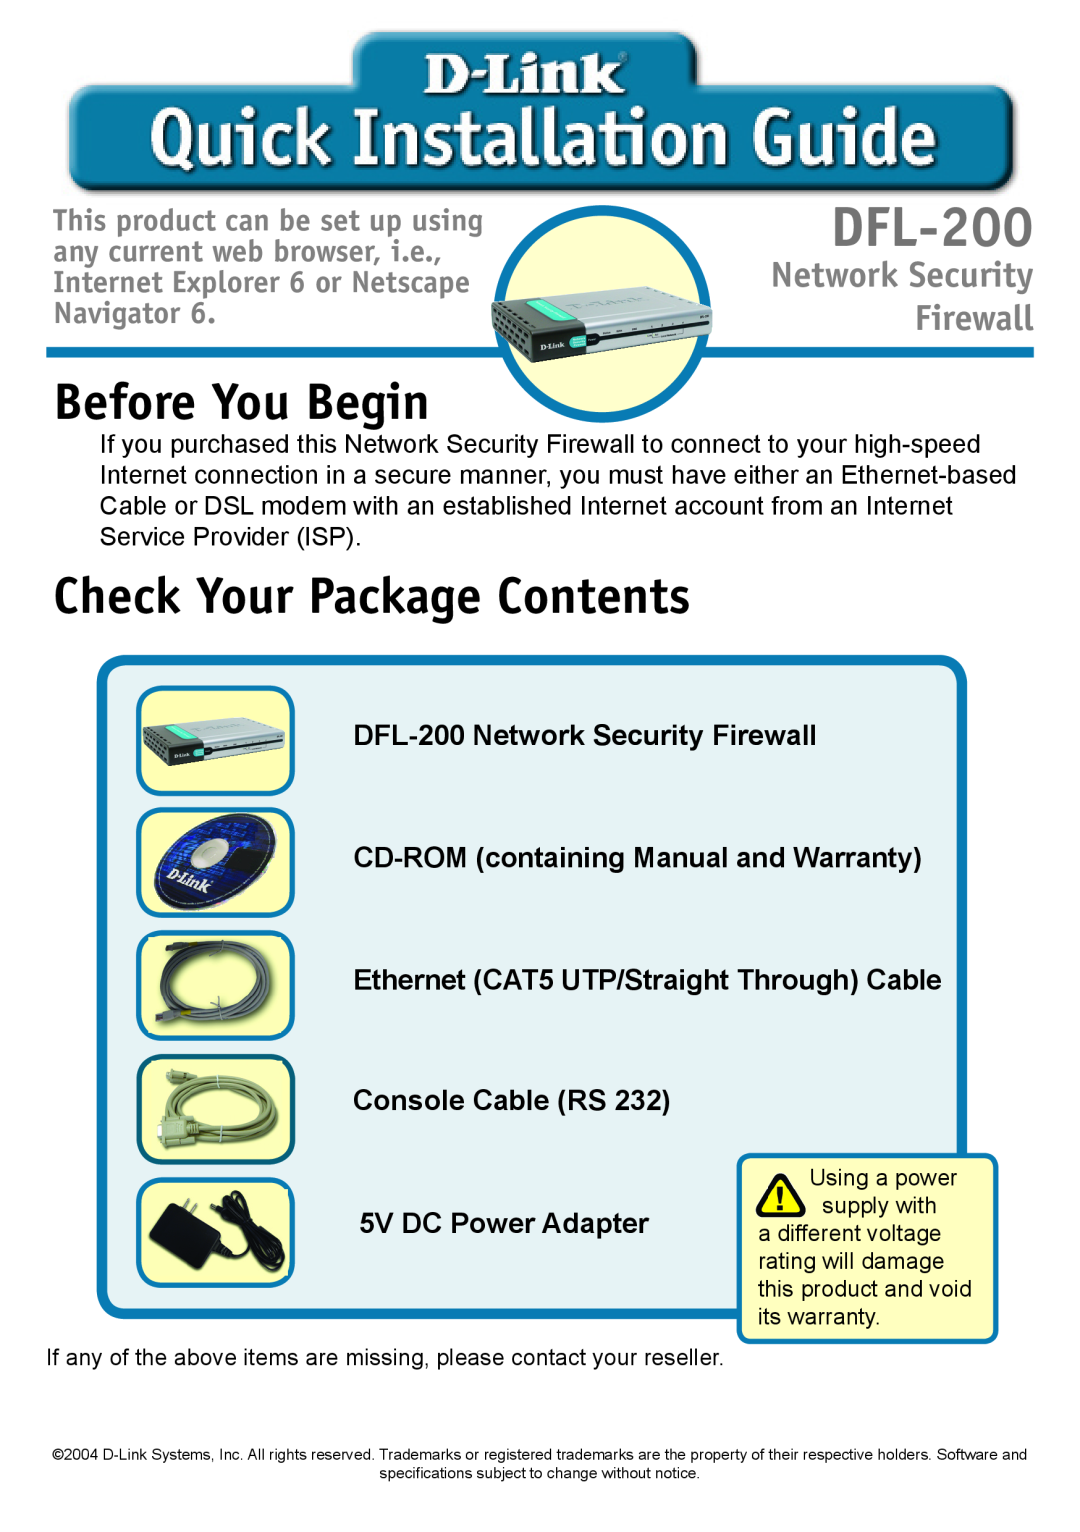 D-Link DFL-200 warranty Before You Begin, Check Your Package Contents, Network Security Firewall, 5V DC Power Adapter 